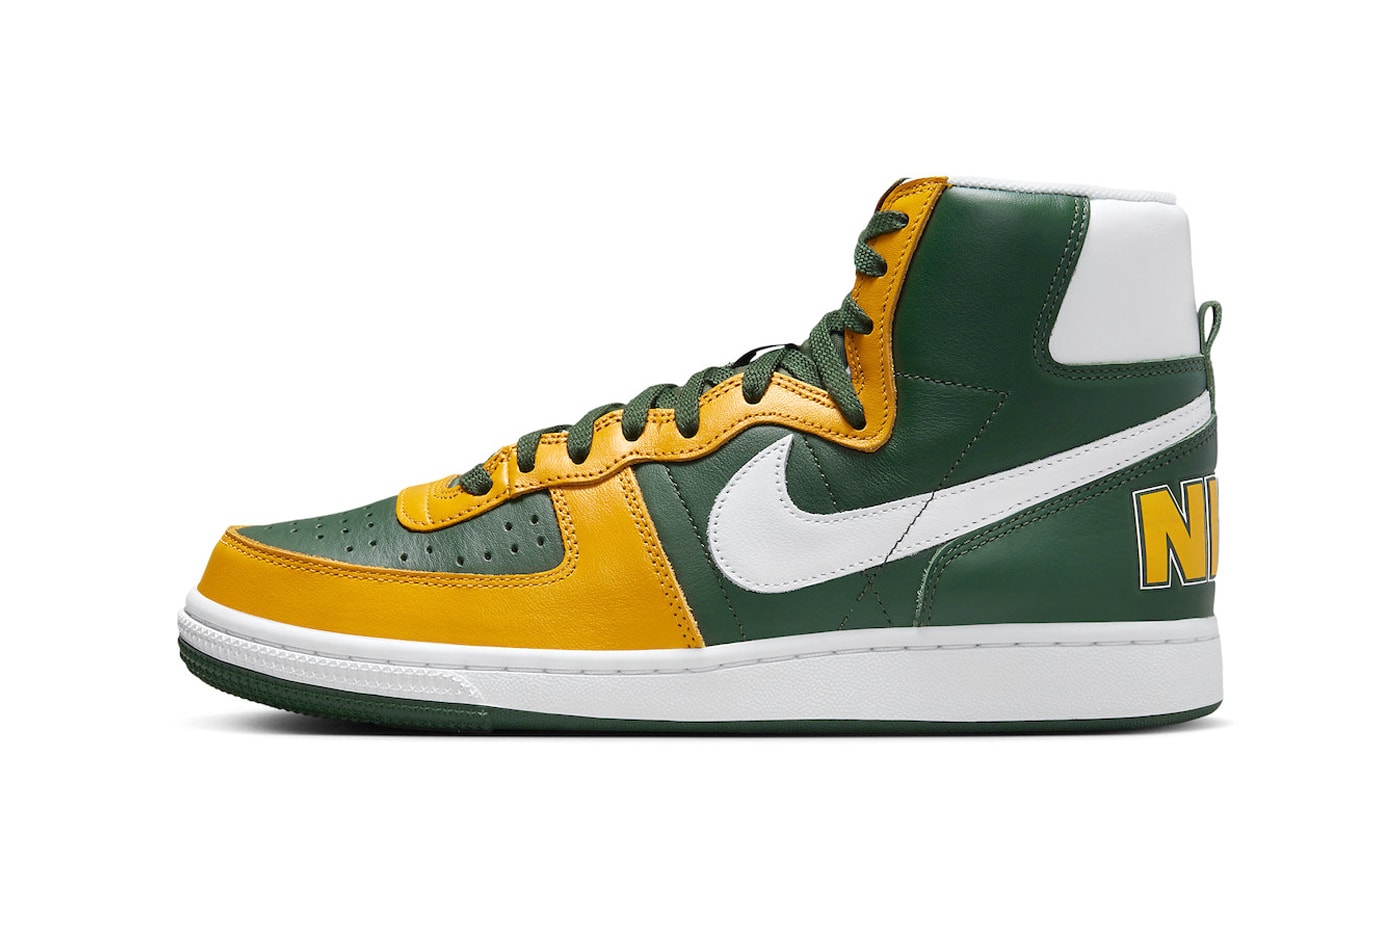 Nike Terminator High "Seattle Supersonics" Return Black Forest/White-Del Sol FN4442-300 green yellow high tops swoosh retro shoes